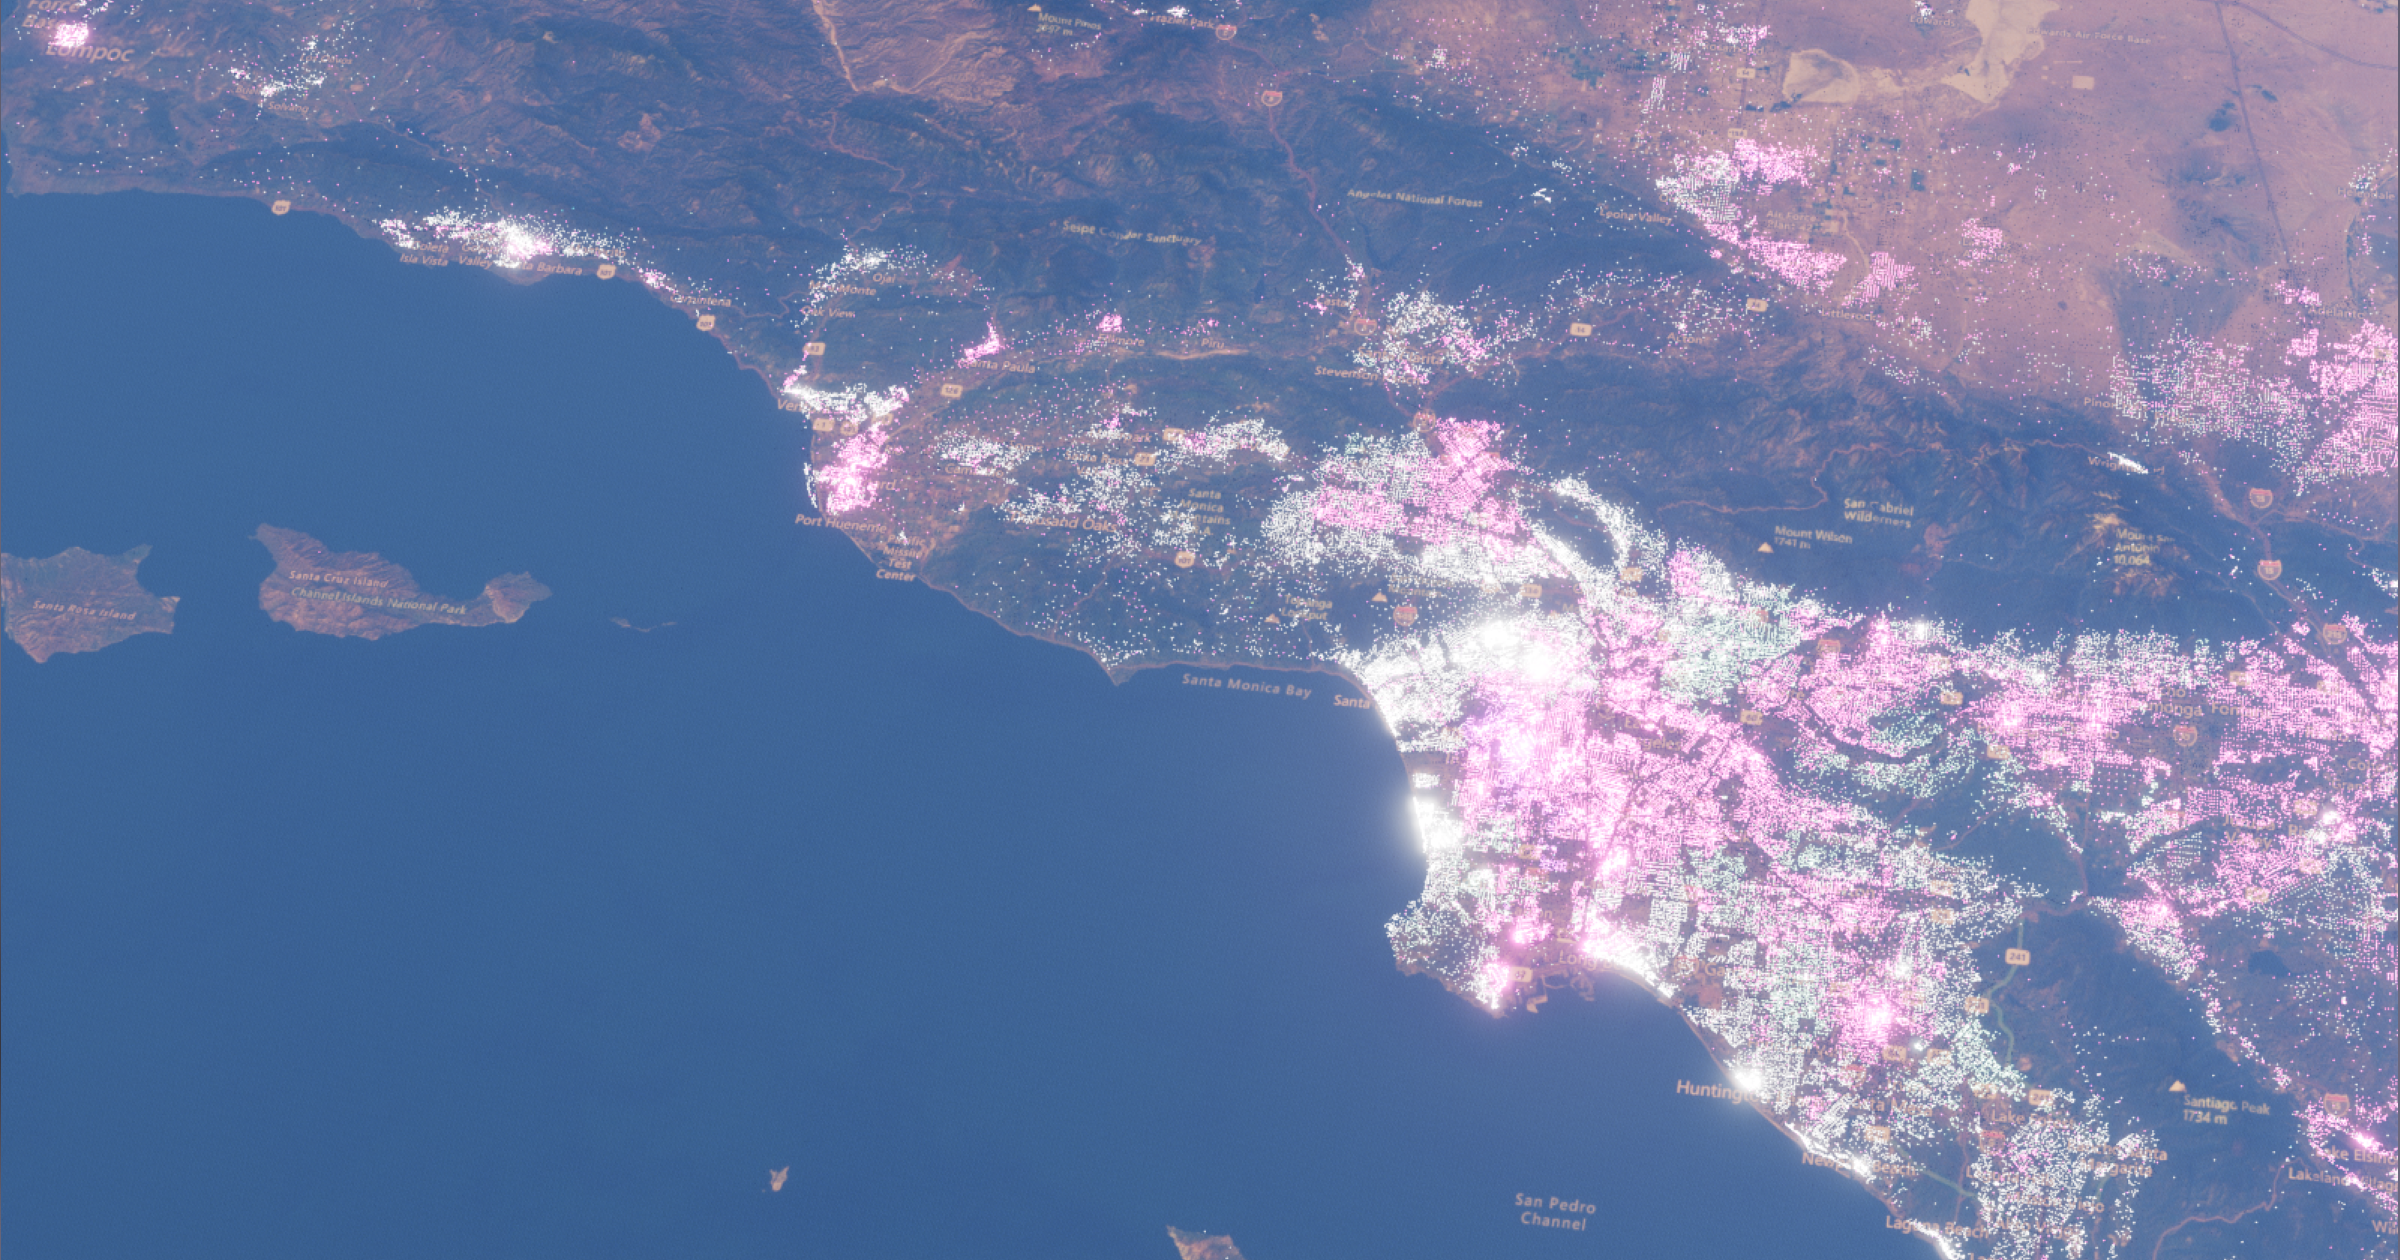 Racial clusters in Los Angeles using the tool constructed in the "Data Visualization in the Metaverse" course